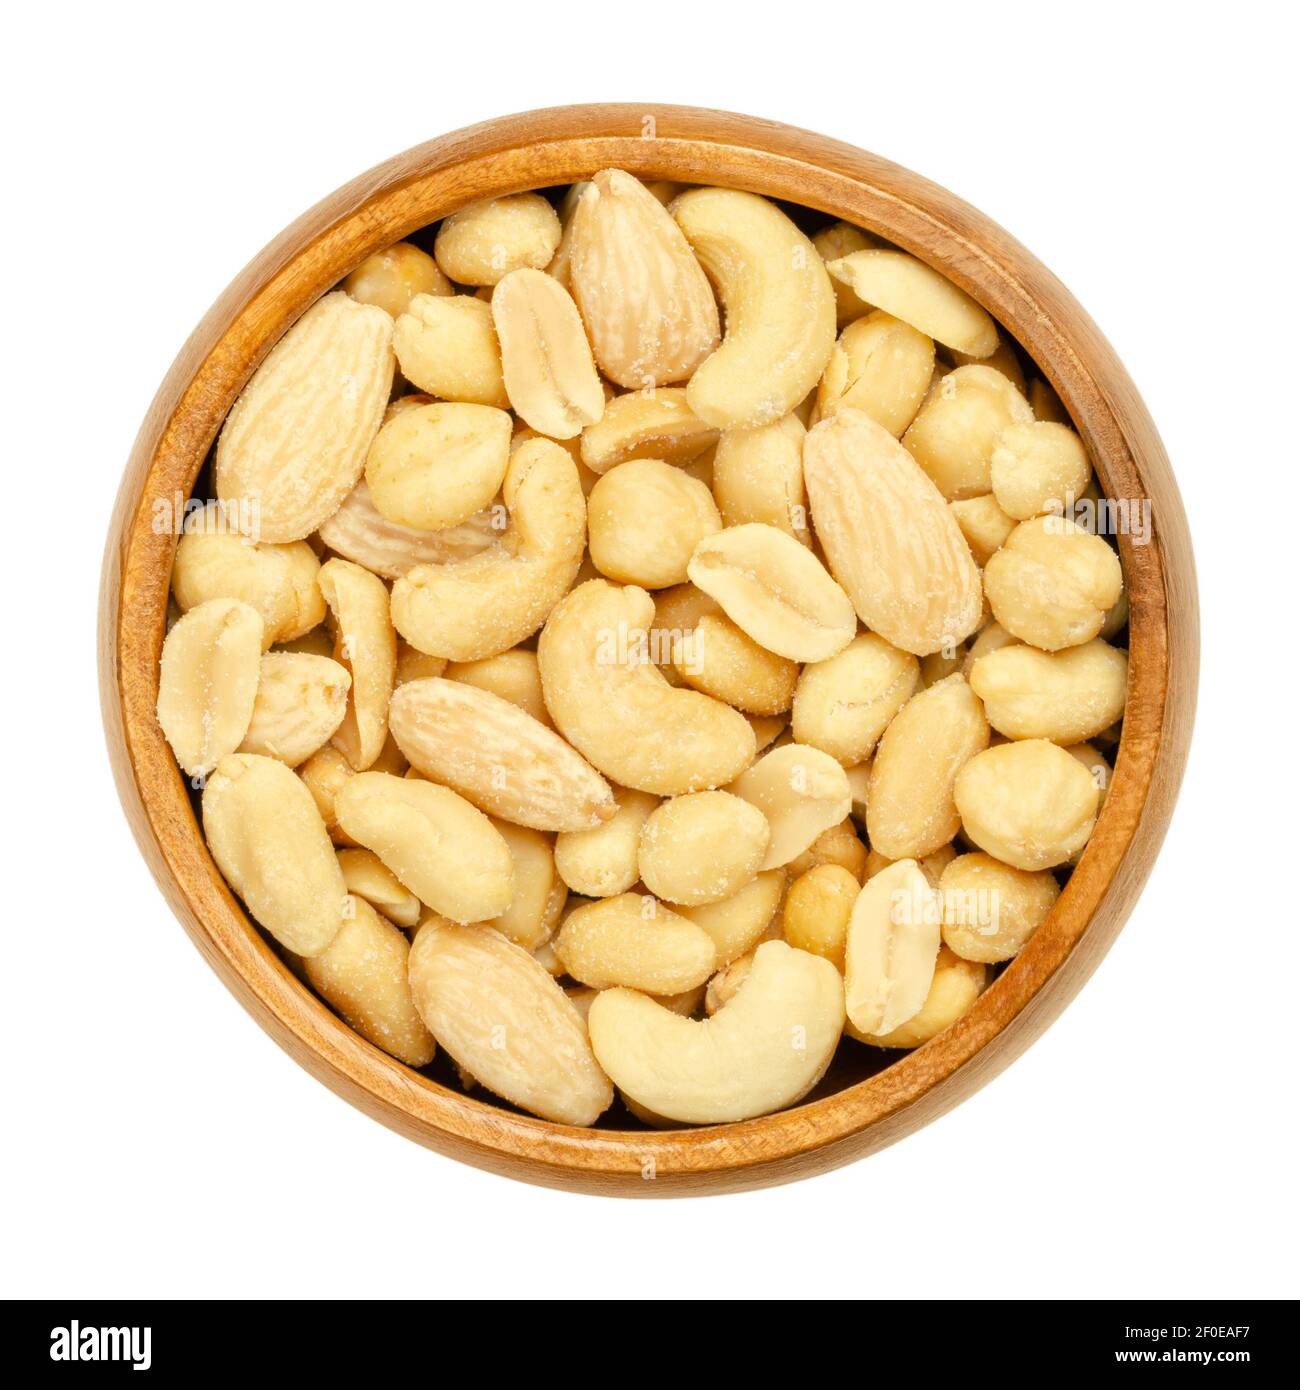 Roasted and salted mixed nuts in a wooden bowl. Snack food, consisting of a mixture of peanuts, cashews, hazelnuts and blanched almonds. Close-up. Stock Photo